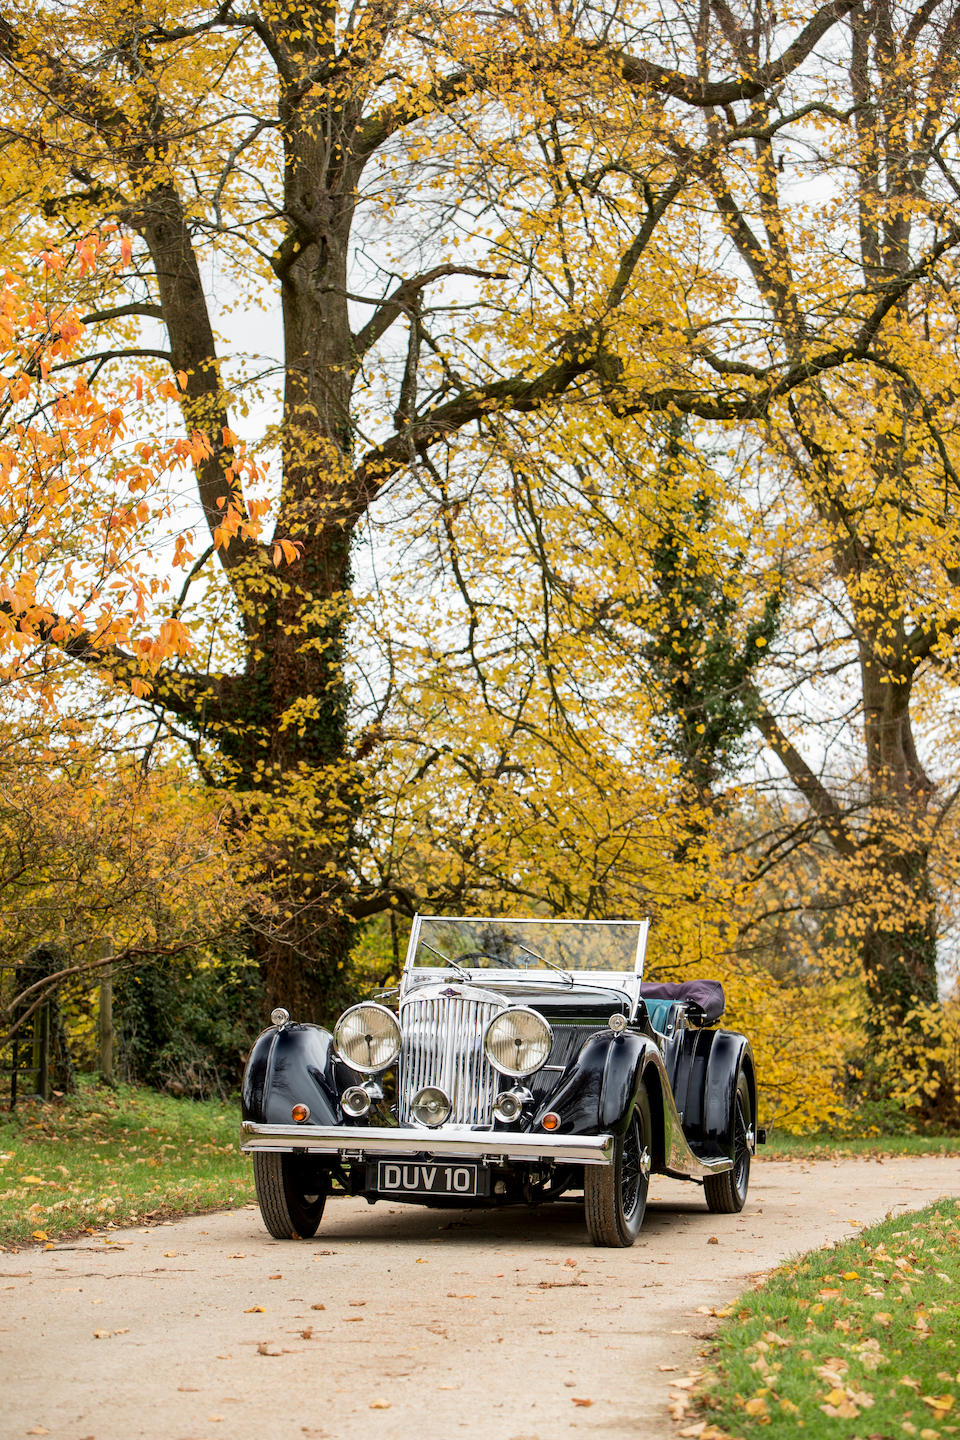 In current ownership since 1992 and only three owners from new,1936 Talbot BG110 Sports Tourer  Chassis no. 4565